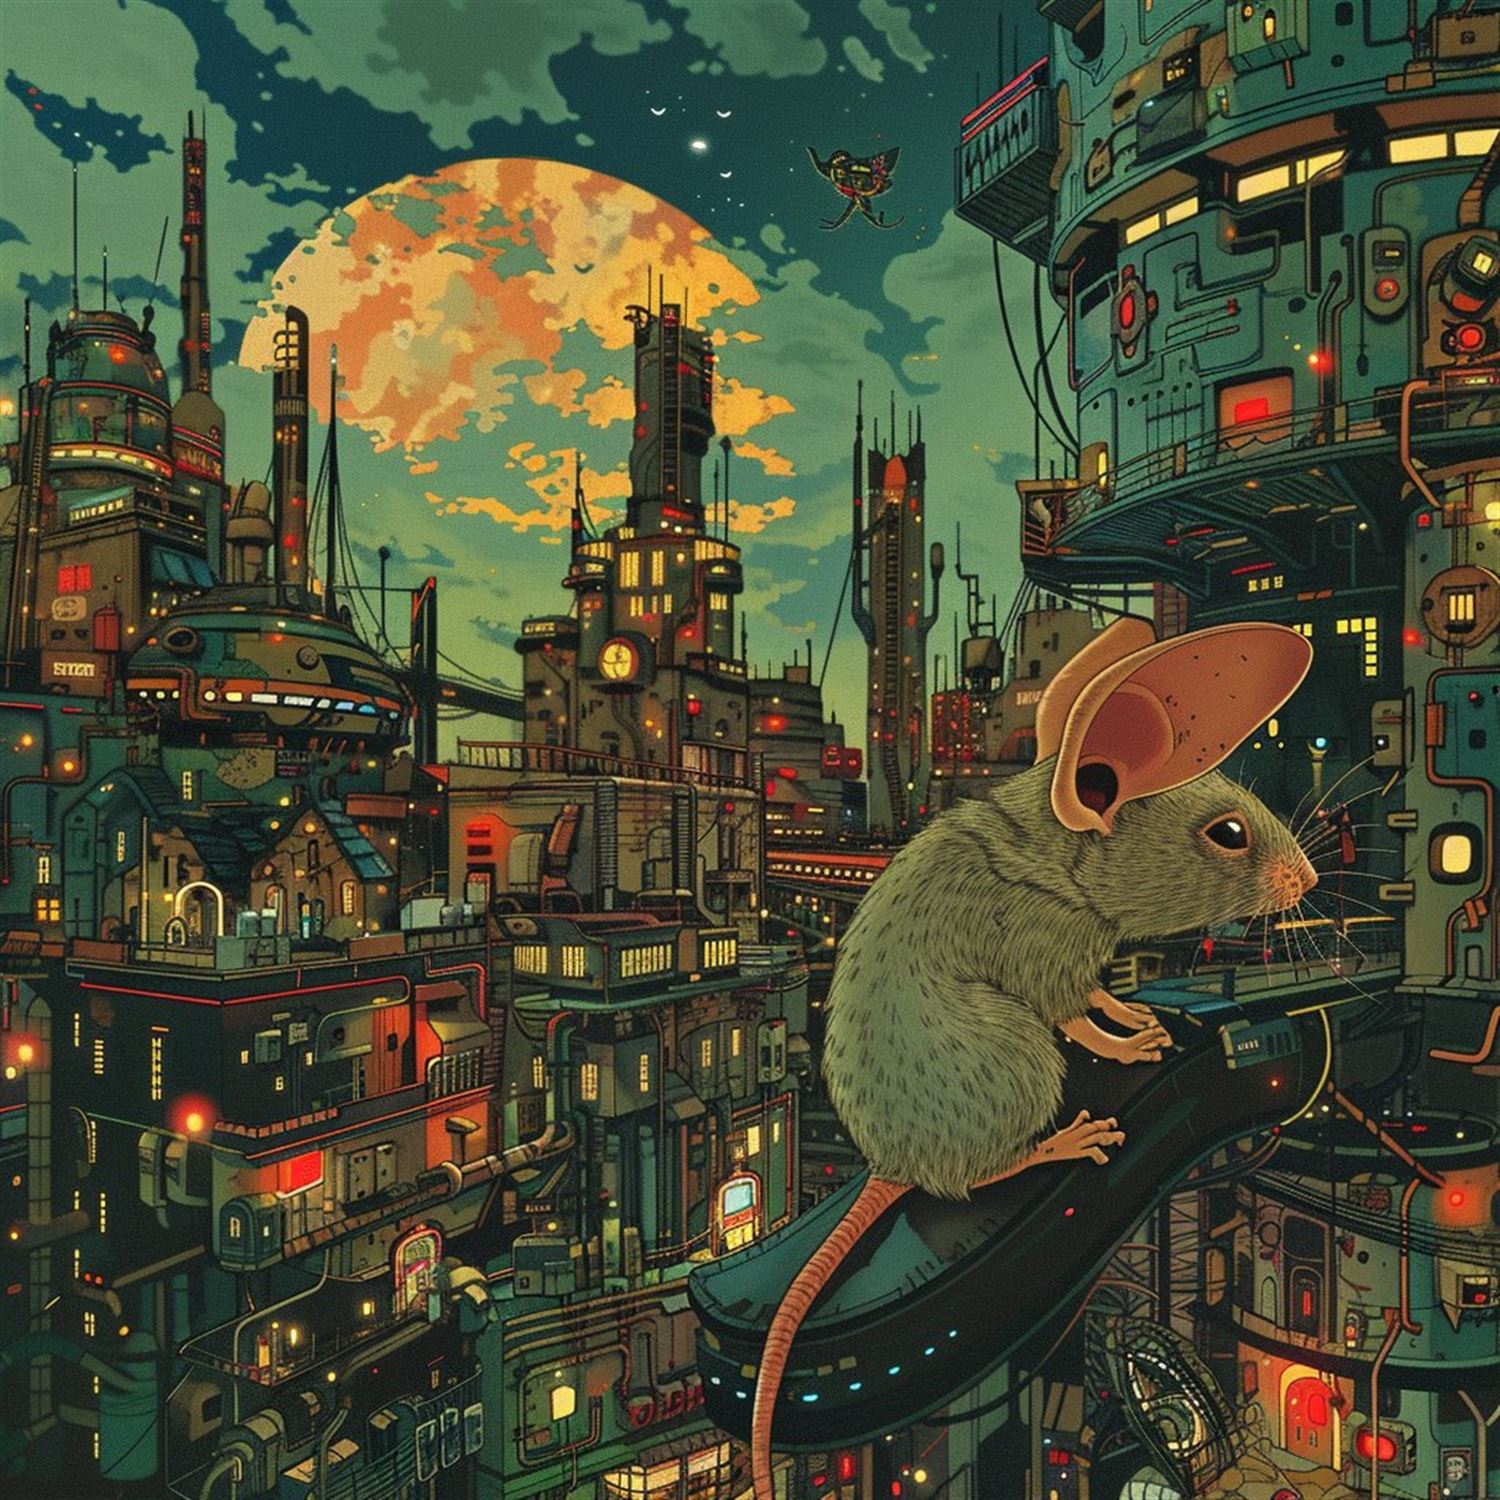 Are We Living in Mouse 🐭 Utopia?